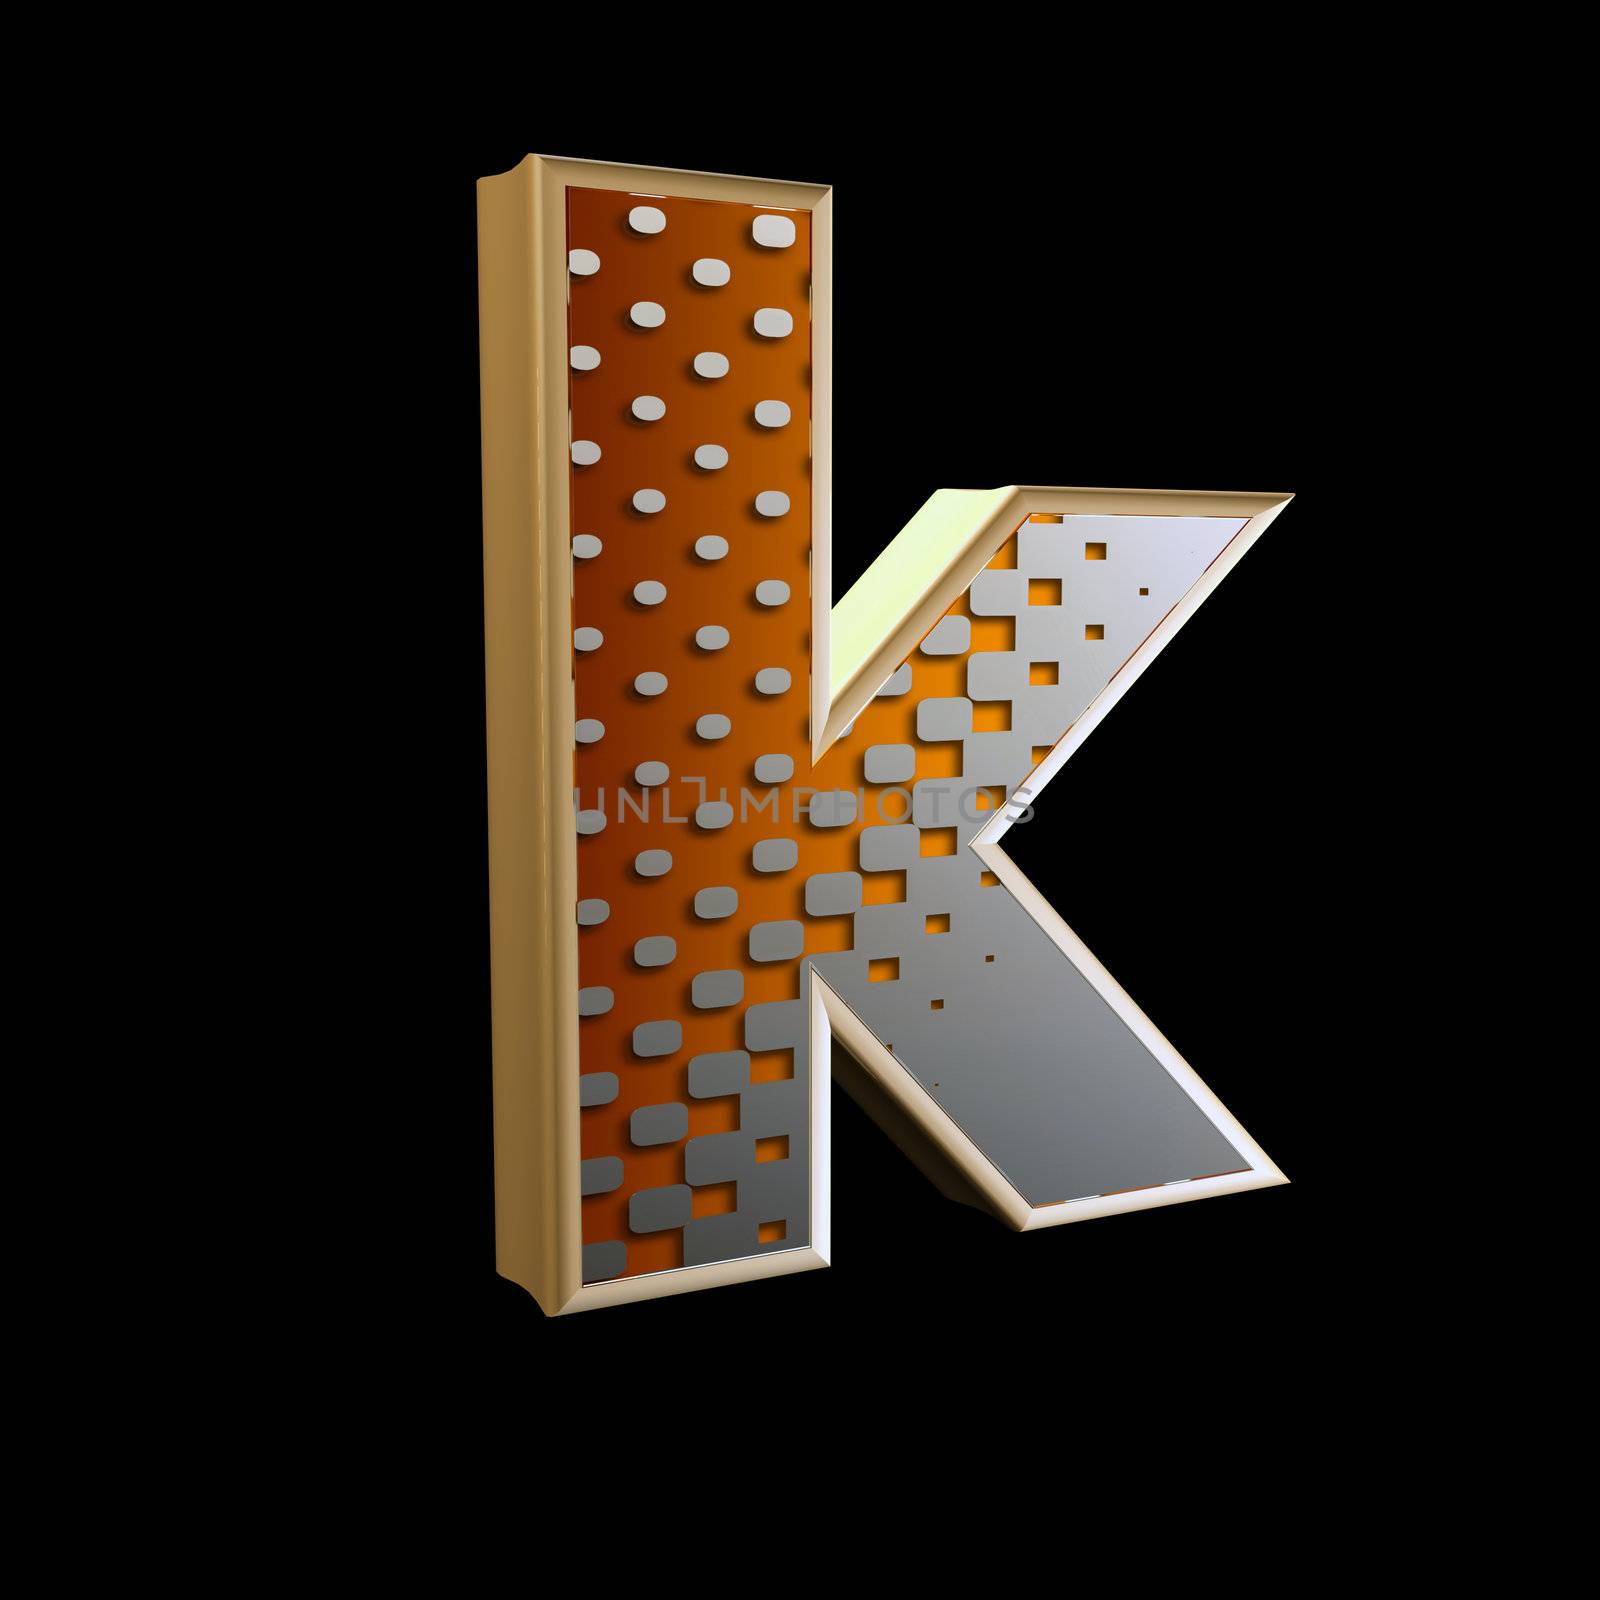 abstract 3d letter with halftone texture - k by chrisroll